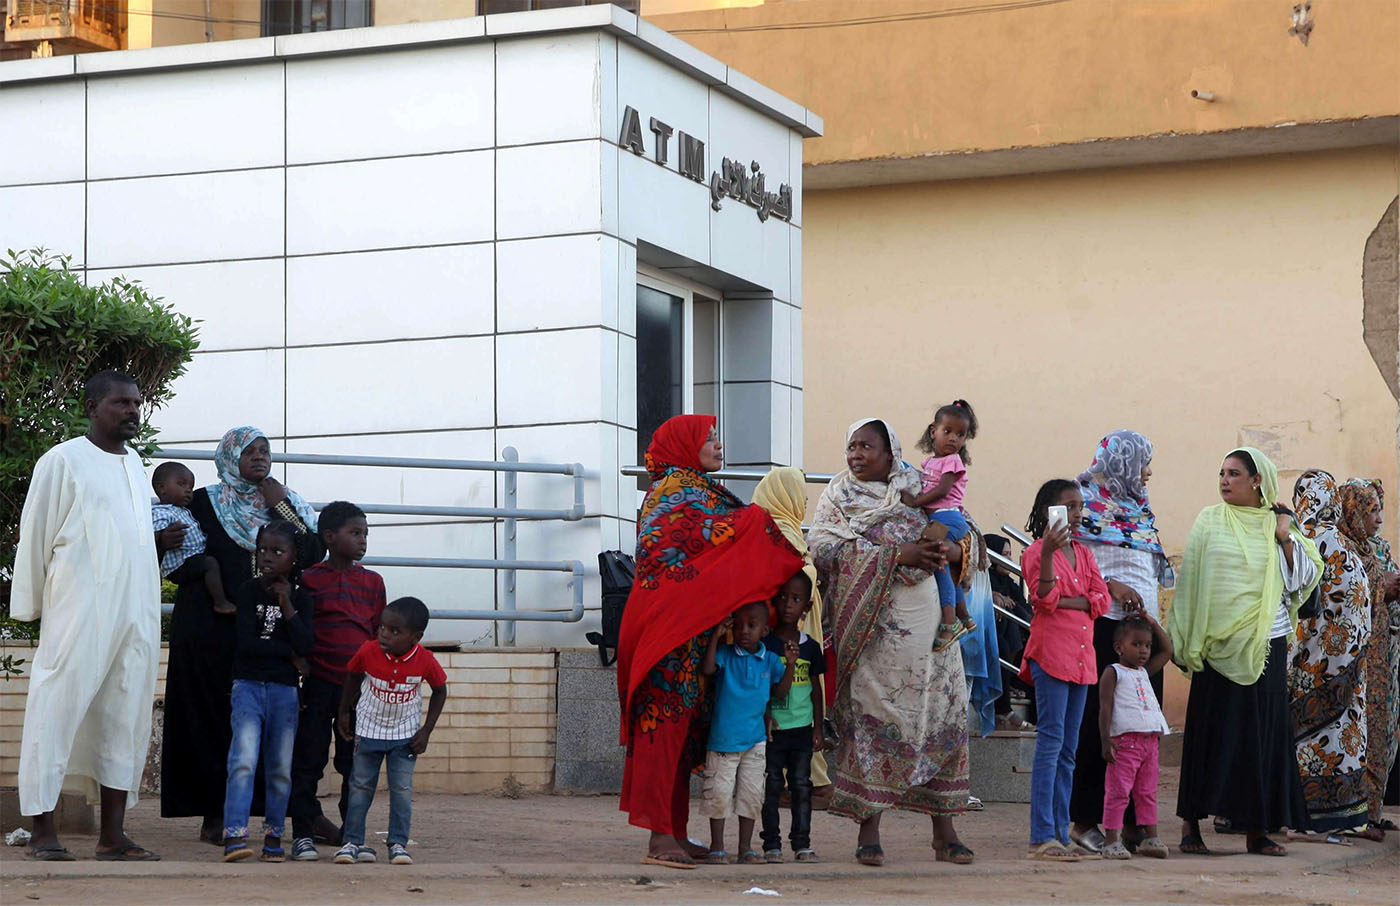 Residents stand outside an automated teller machine (ATM) in Khartoum